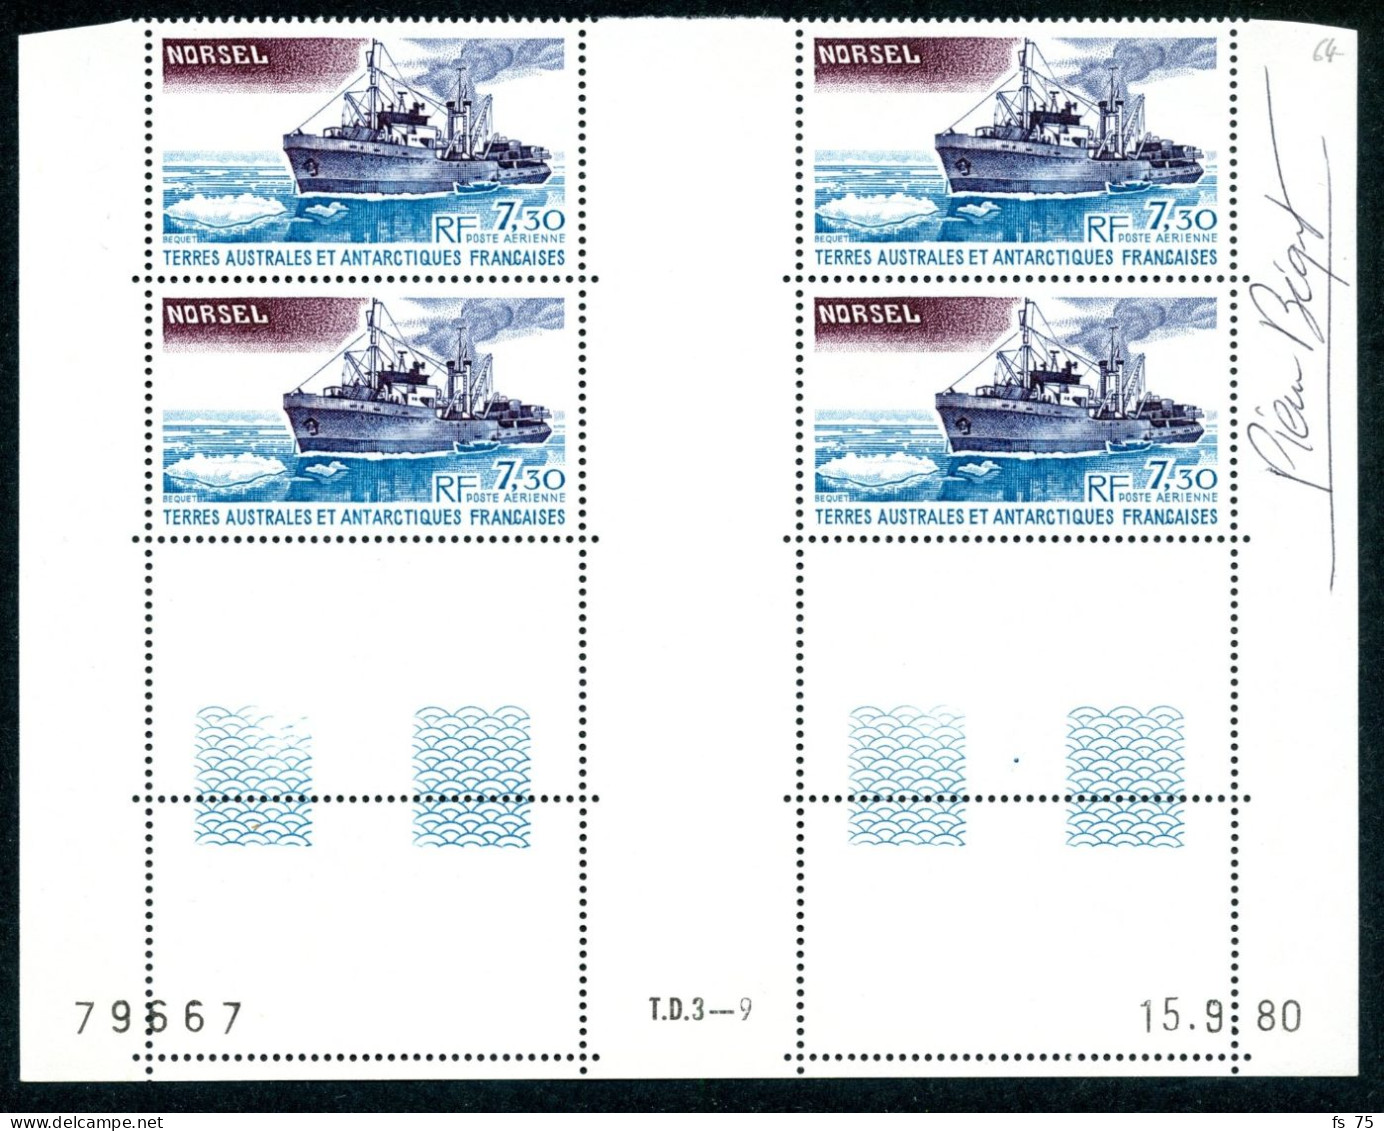 TAAF - PA N°64 -  NORSEL - BLOC DE 4 - COIN DATE - SIGNE P. BEQUET - Neufs